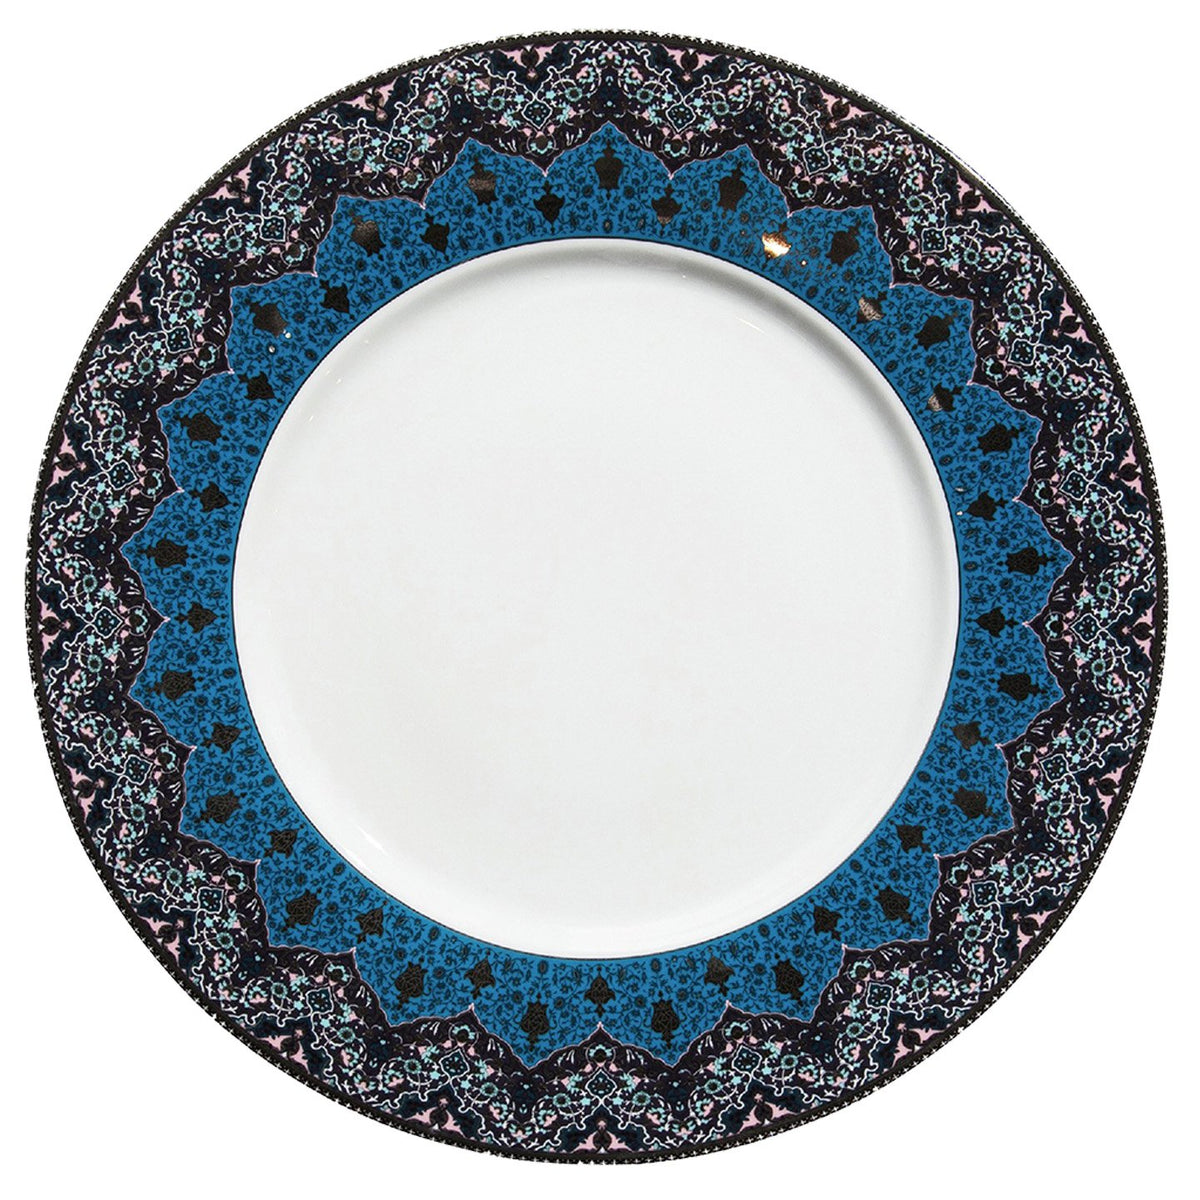 Dhara Peacock Charger Plate